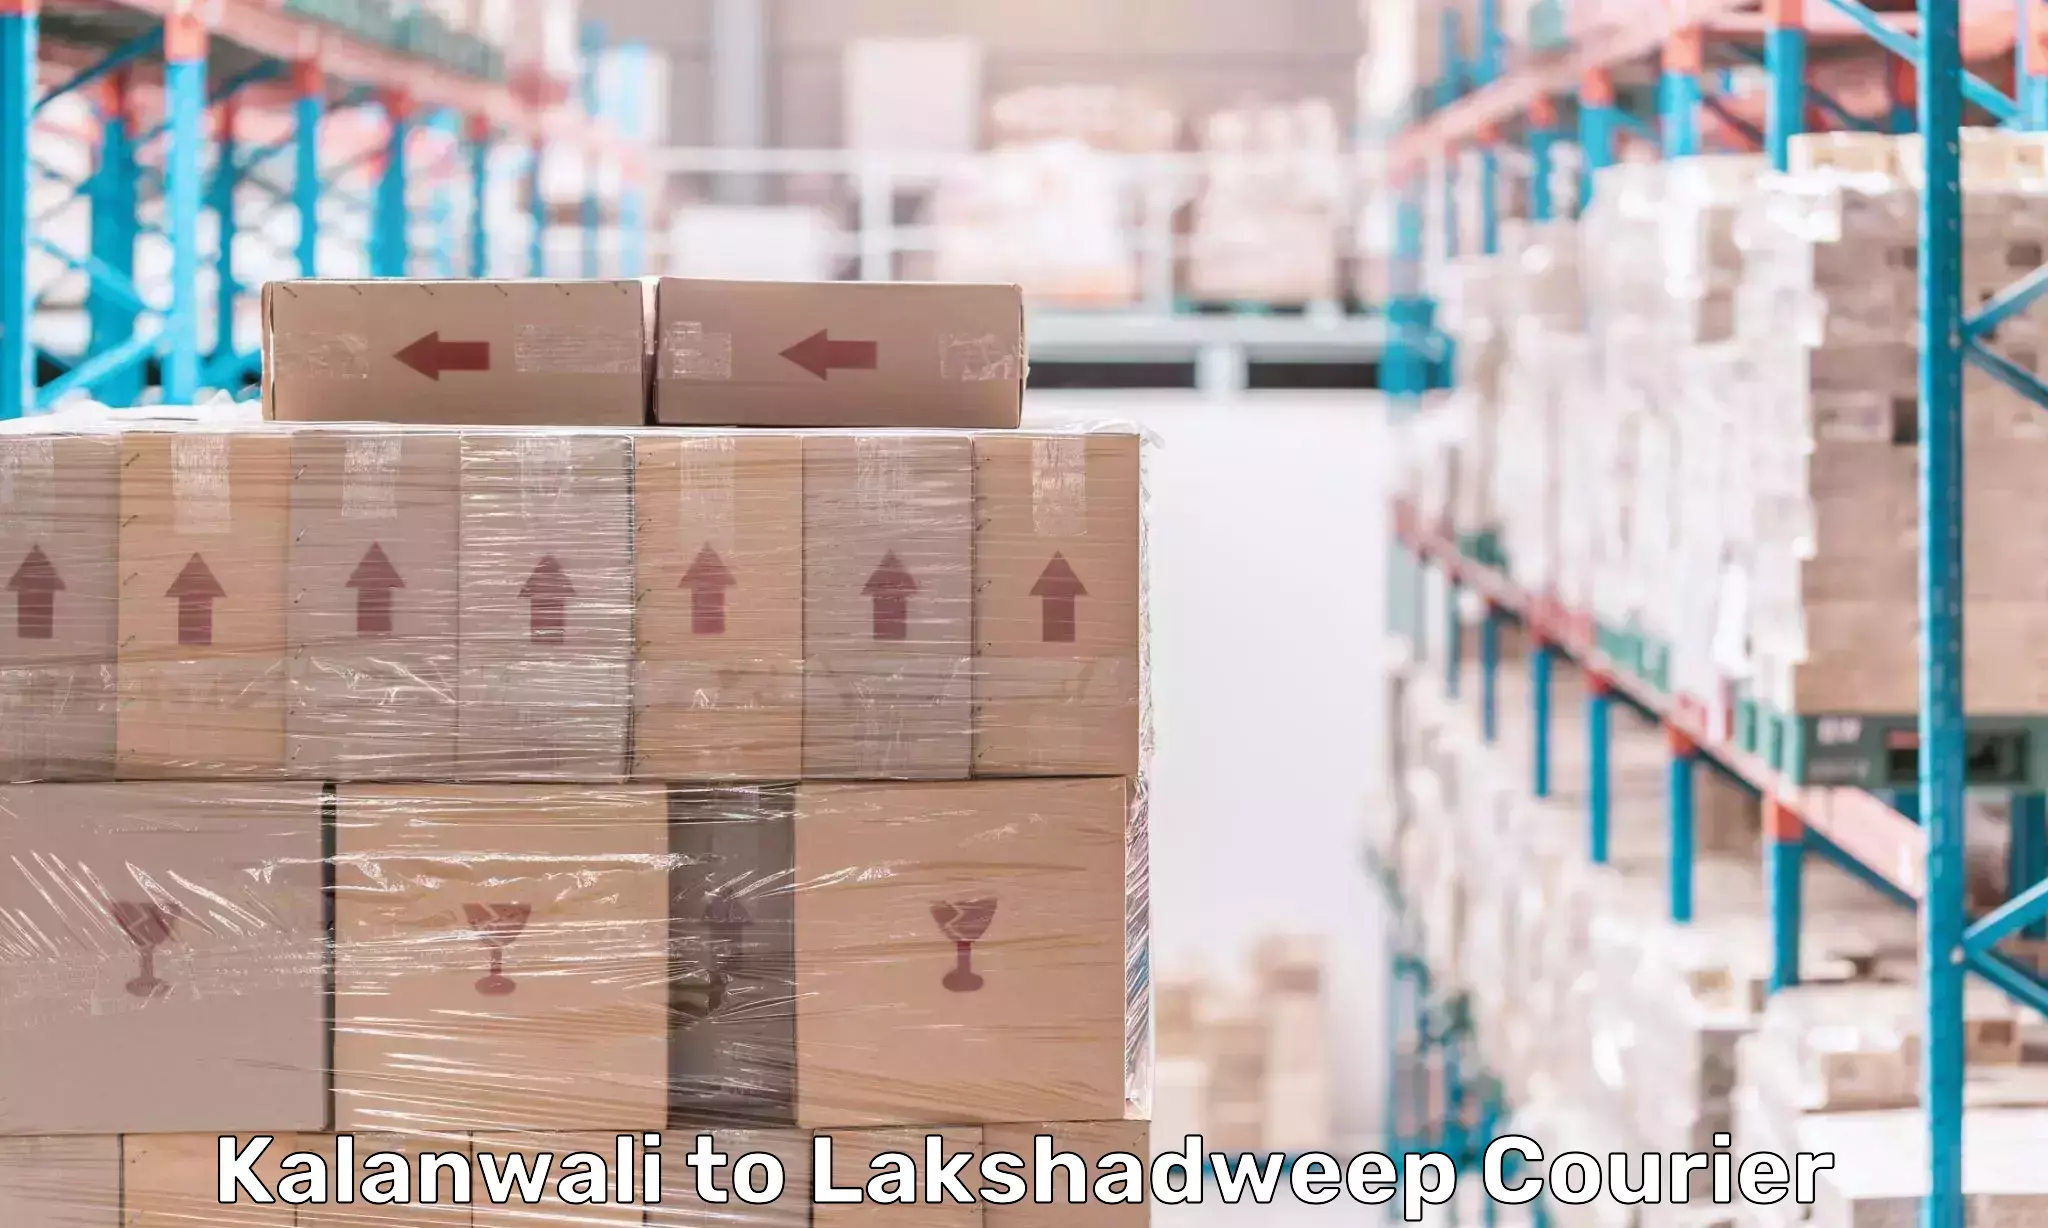 Express delivery capabilities in Kalanwali to Lakshadweep